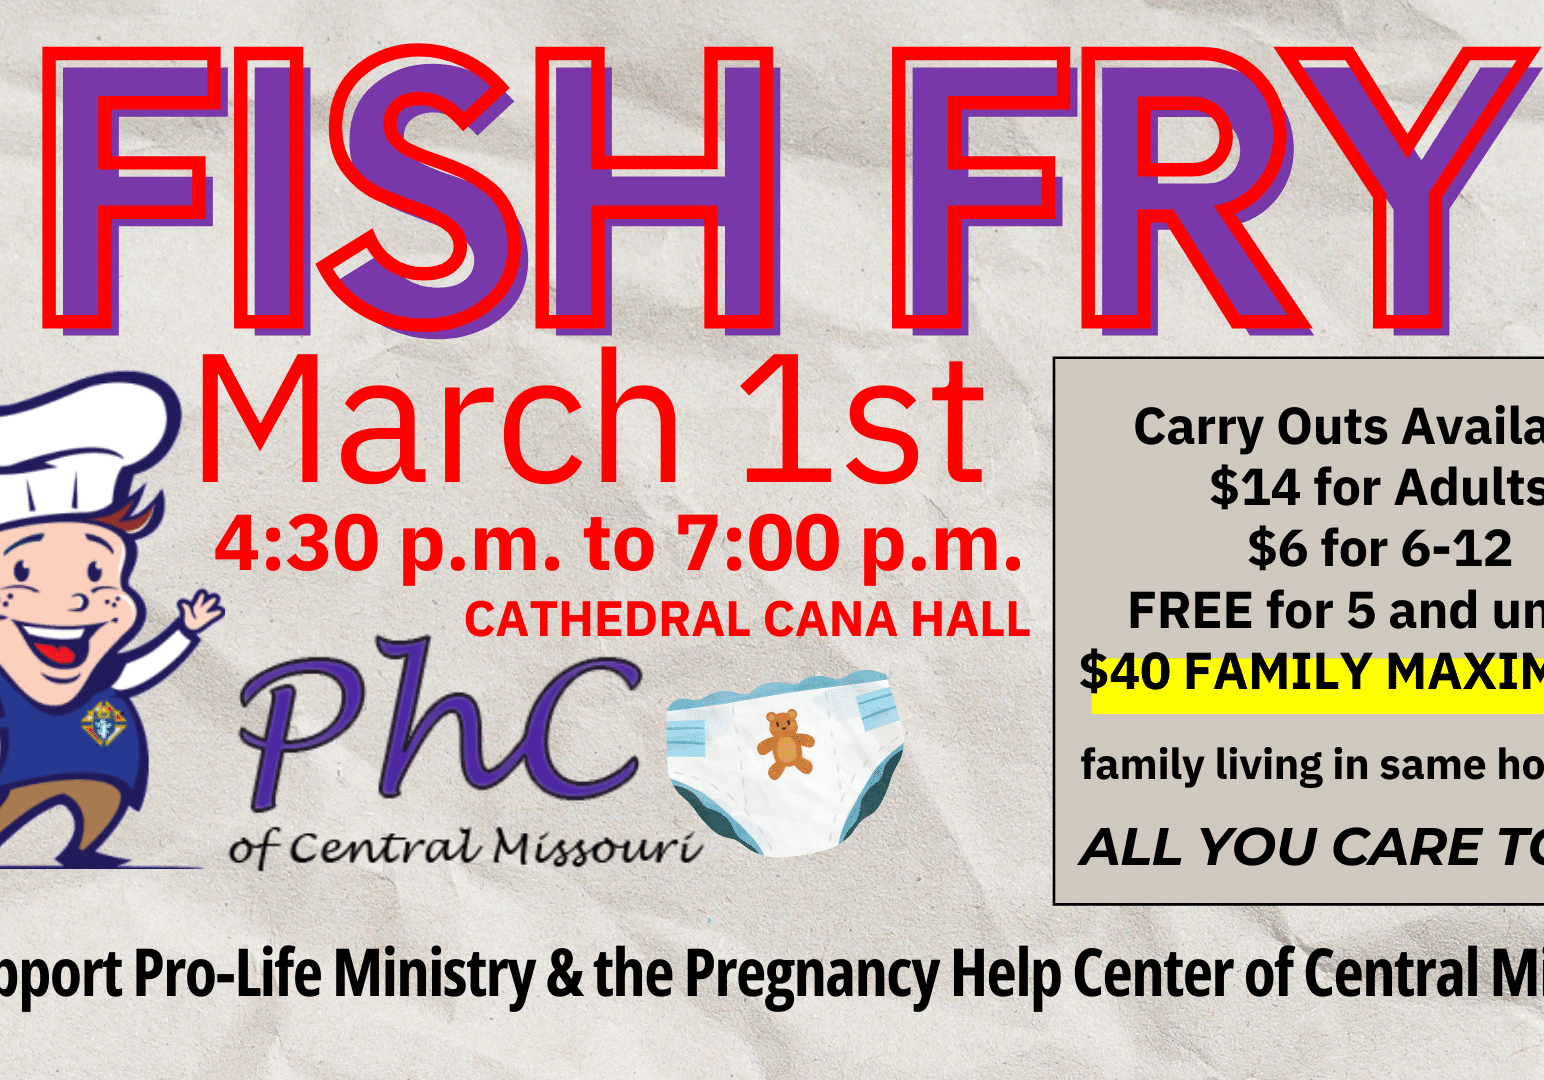 It’s A Fish Fry Friday To Help Support Pro Life Ministry And The Pregnancy Help Center! (1920 X 1080 Px)